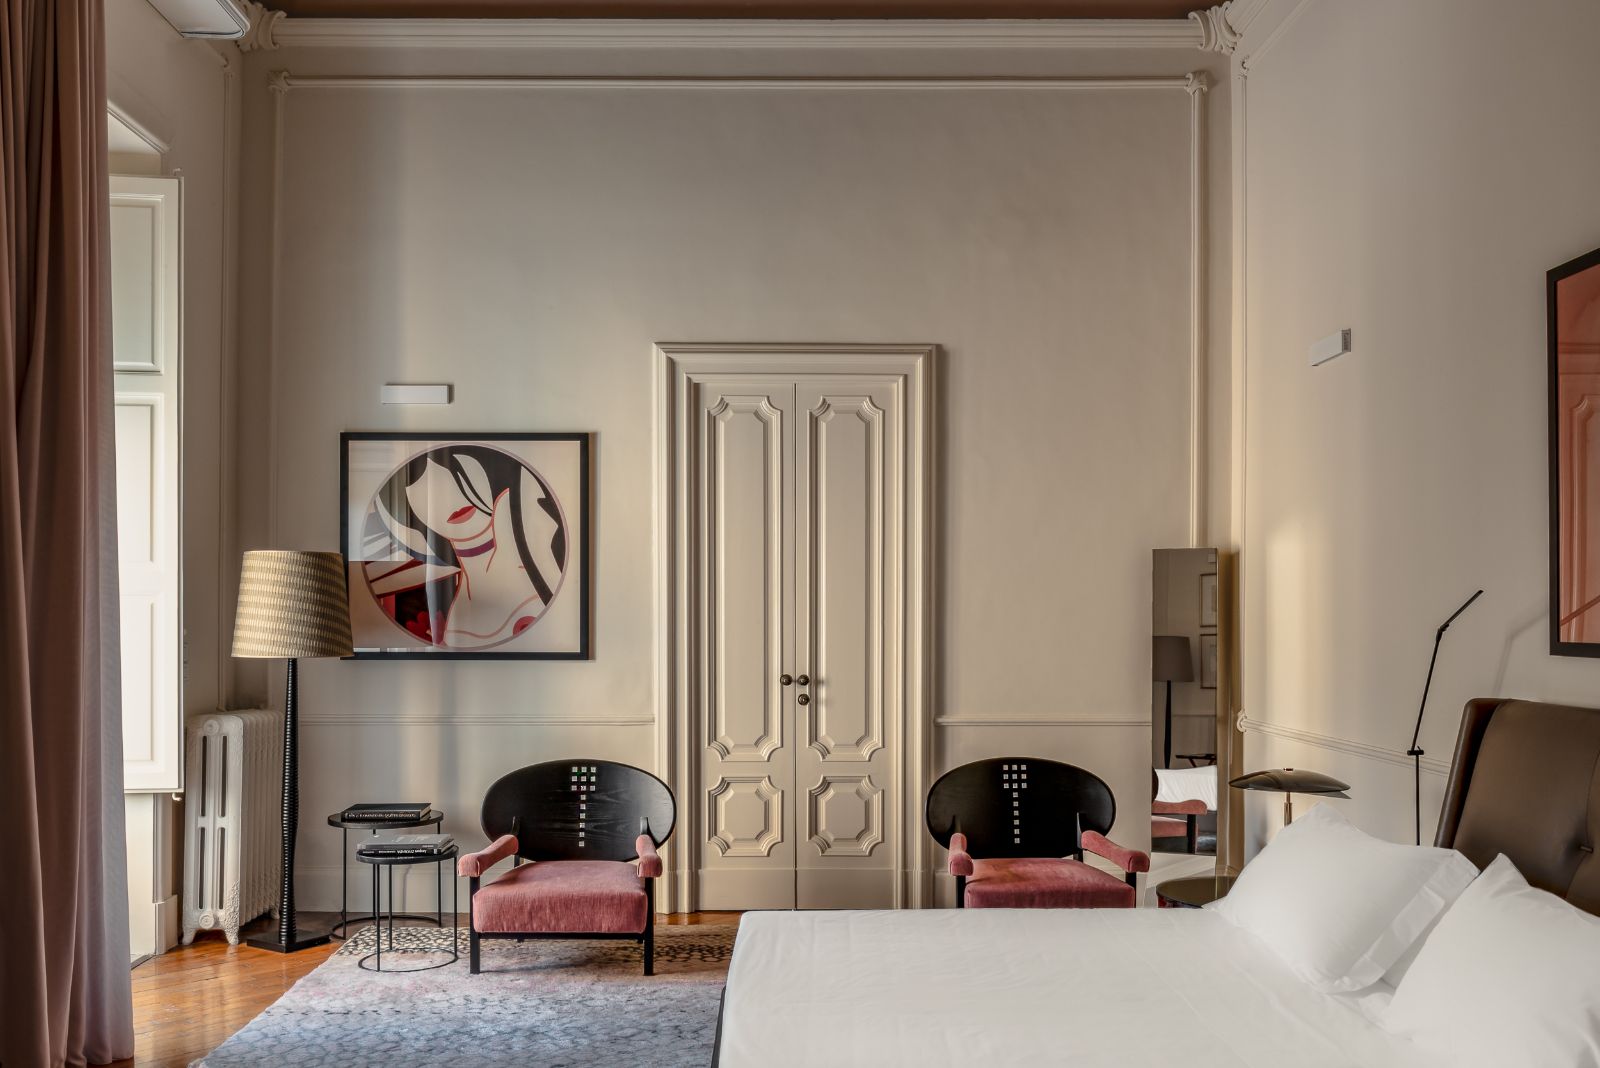 High-ceilinged Bedroom of the Lady Astor Suite at luxury hotel Palazzo Bozzi Corso in Lecce, Italy